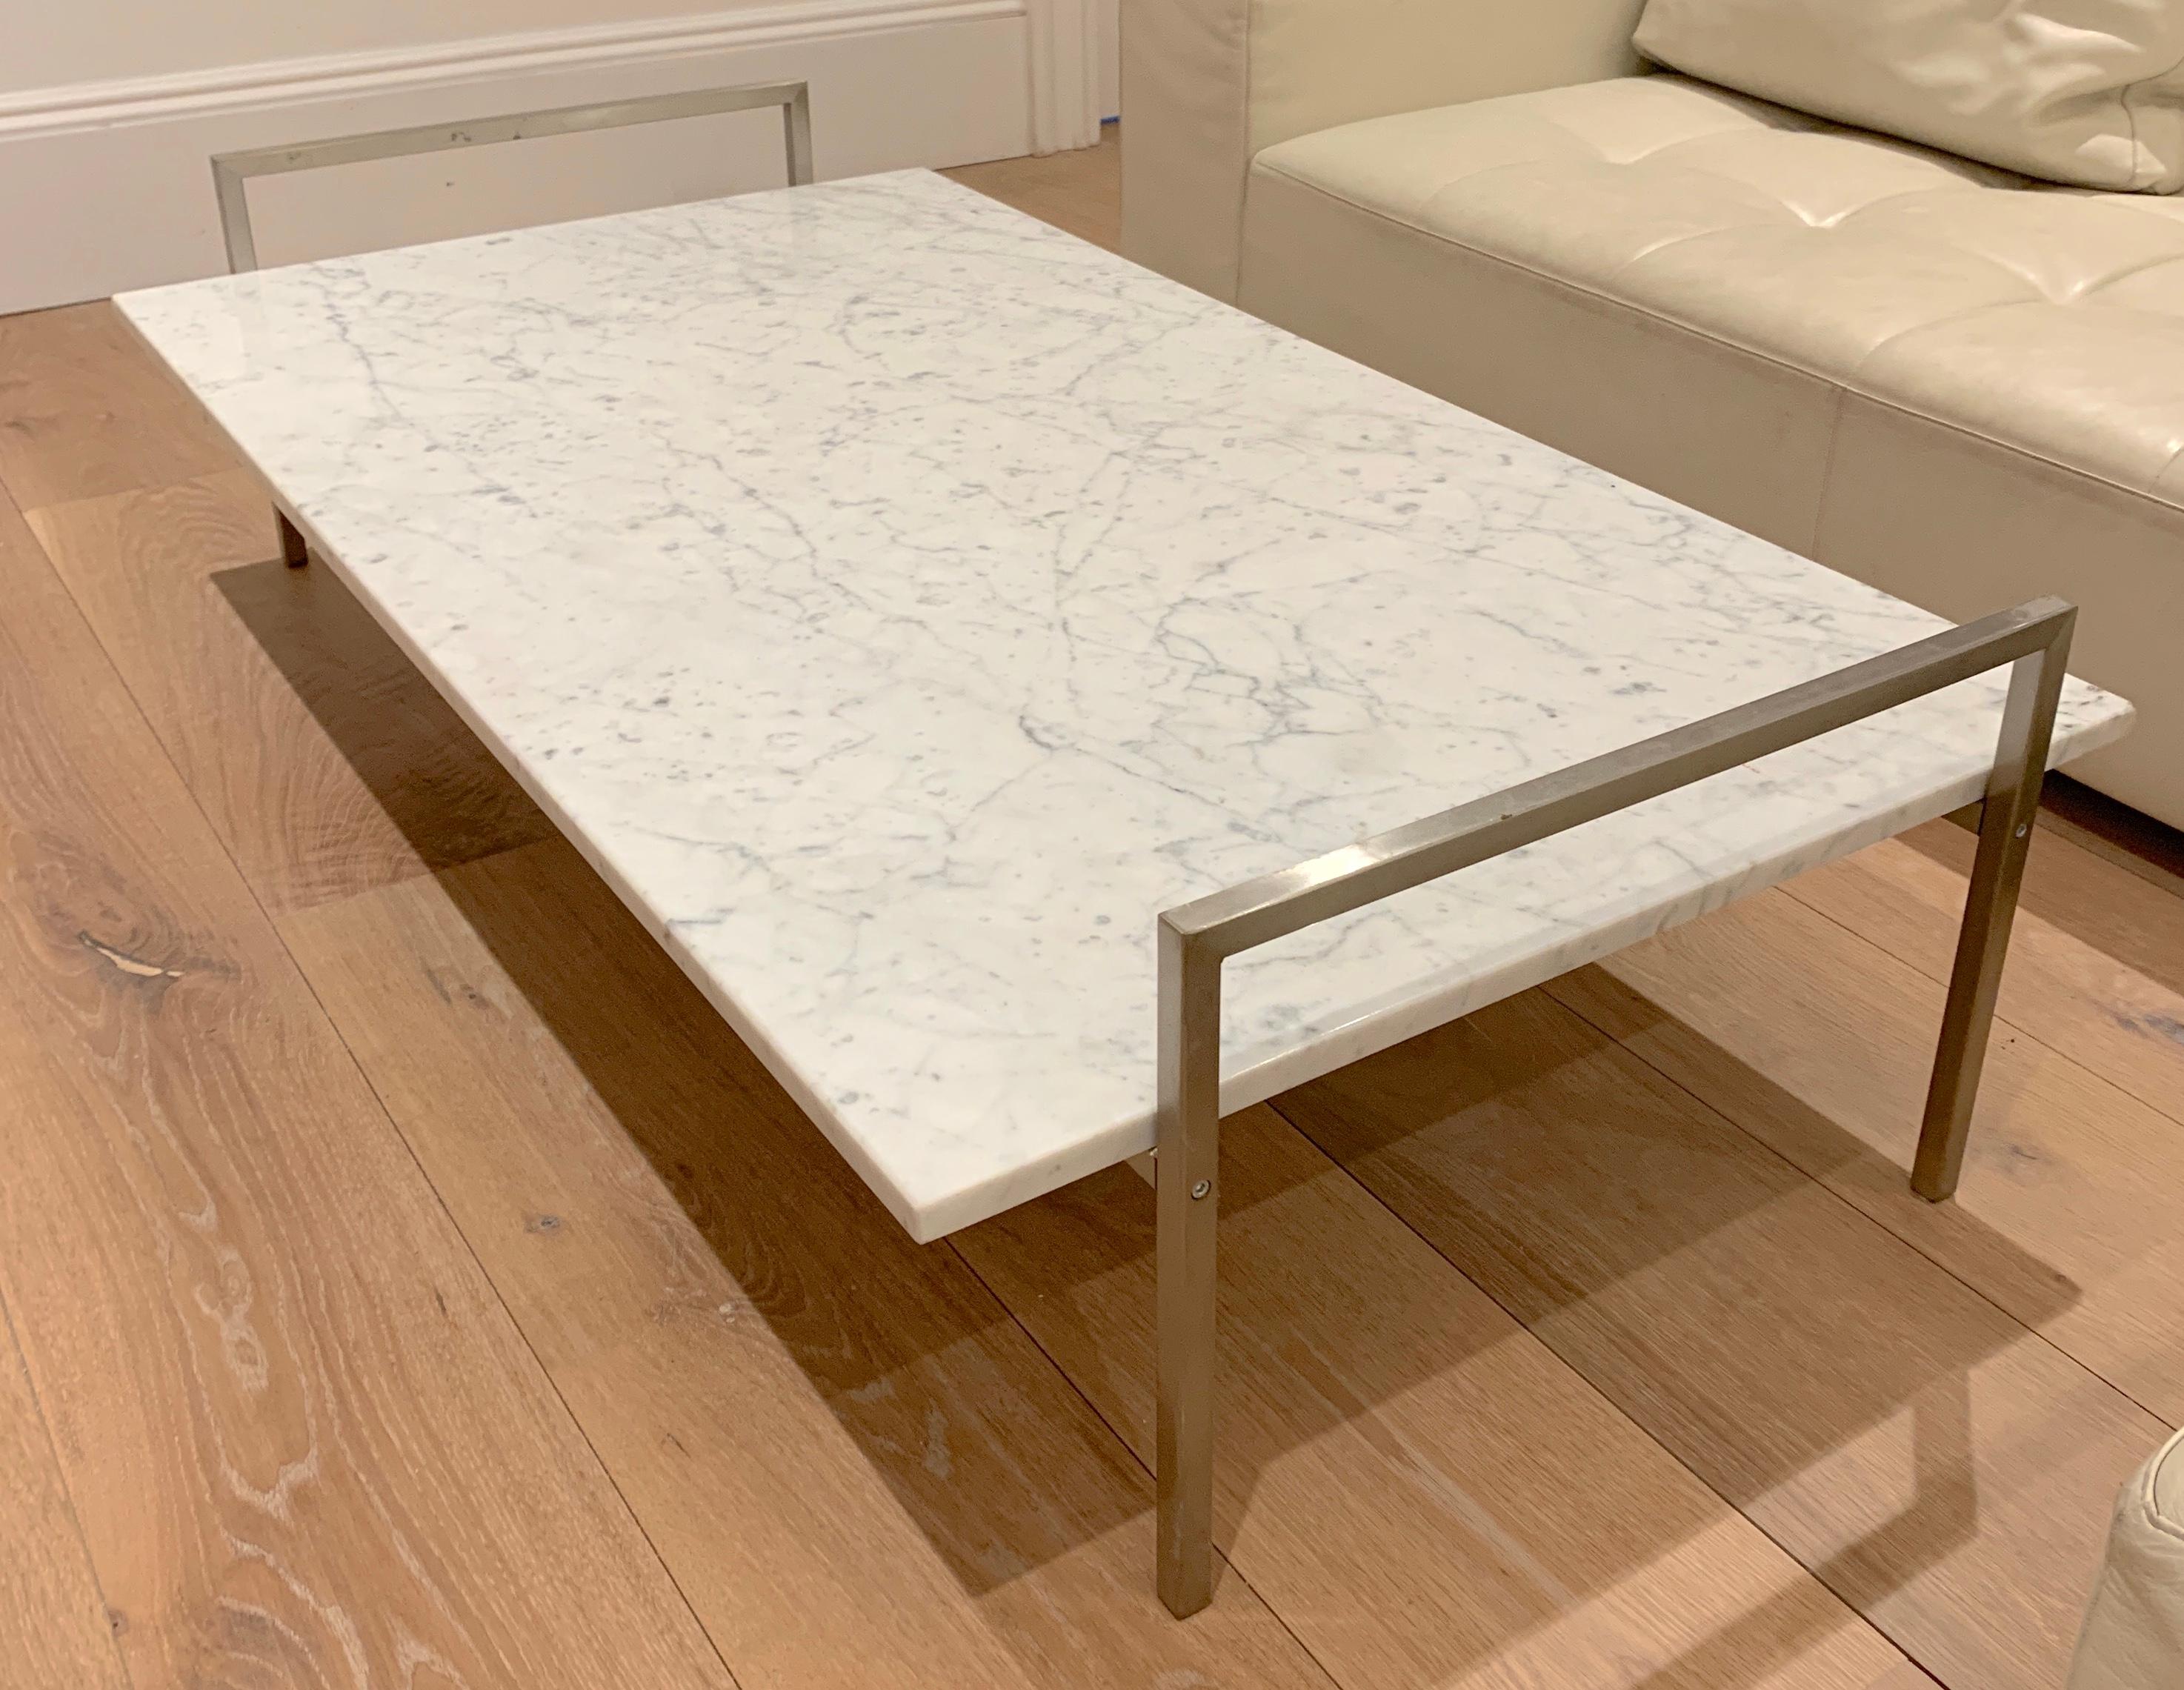 Sleek, Sturdy and immensely Sexy - this low-slung coffee table suits all rooms. A fit for modern minimalism but made with timeless materials that suit contemporary, traditional and even eclectic styles. 

Table comes in two pieces: Marble Slab